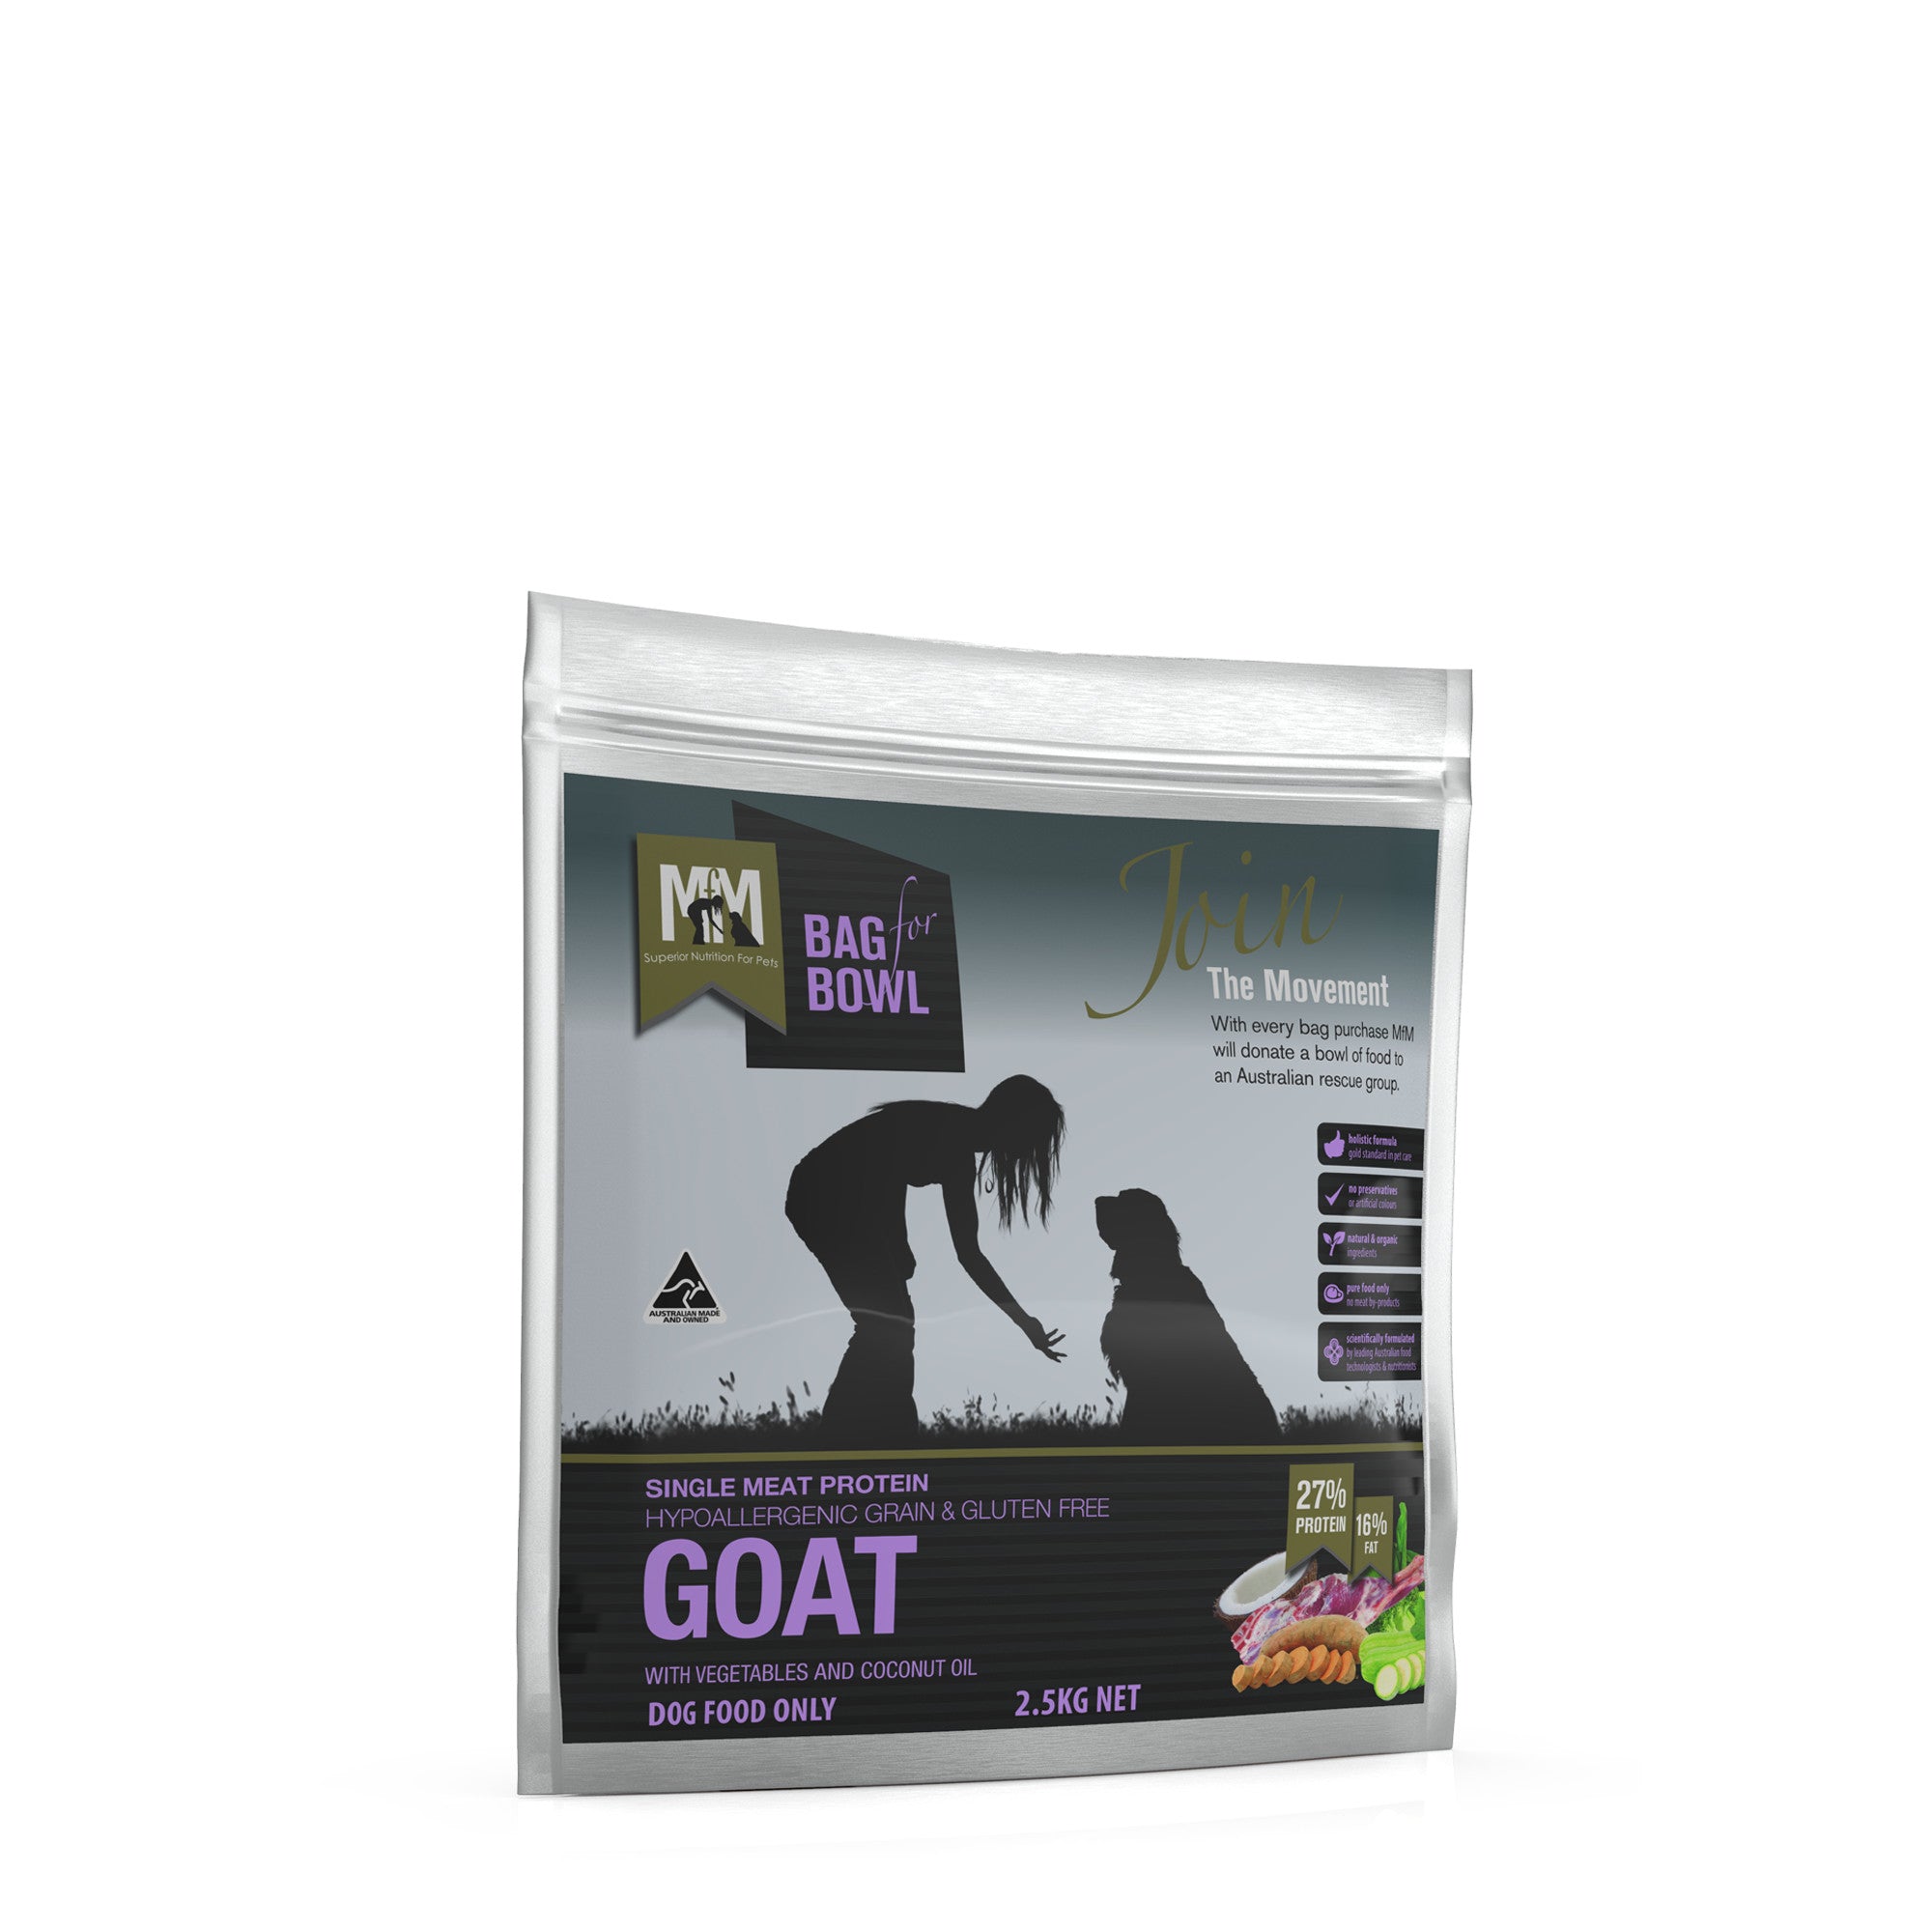 Meals for Mutts Goat Single Meat Protein Dog Food 2.5kg.